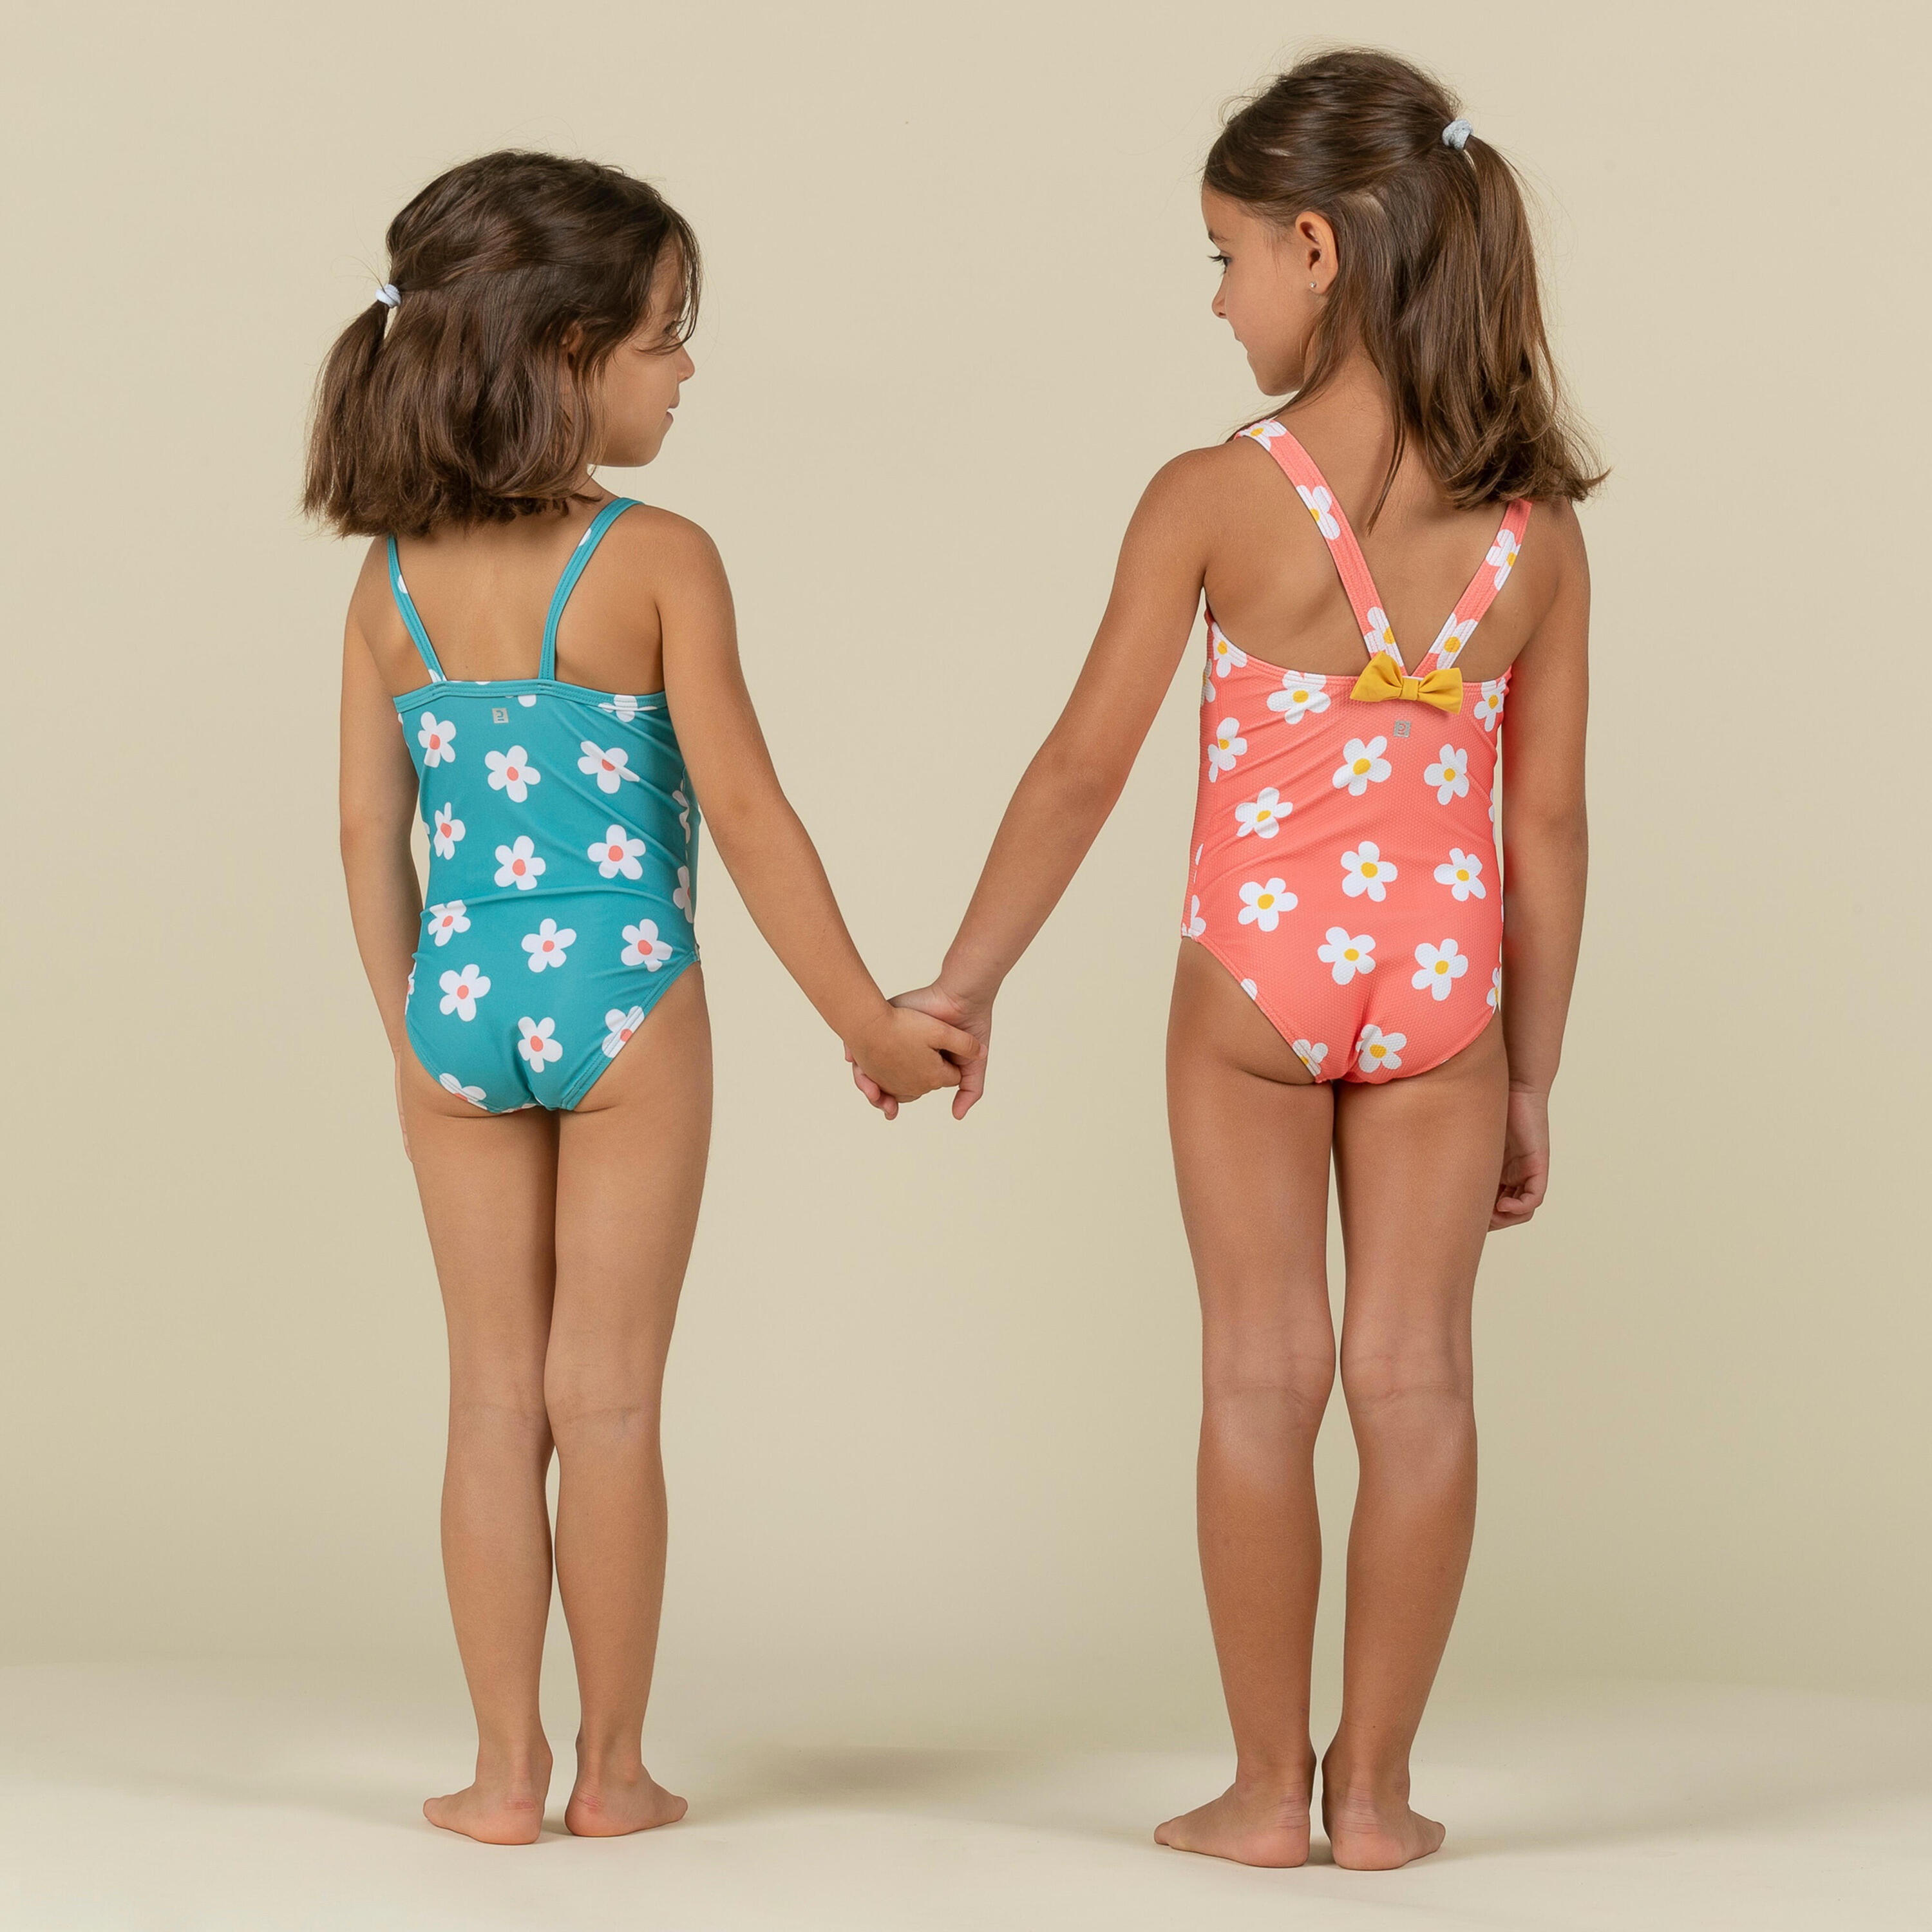 Baby Girls' One-Piece Swimsuit Blue with Flower Print 5/11